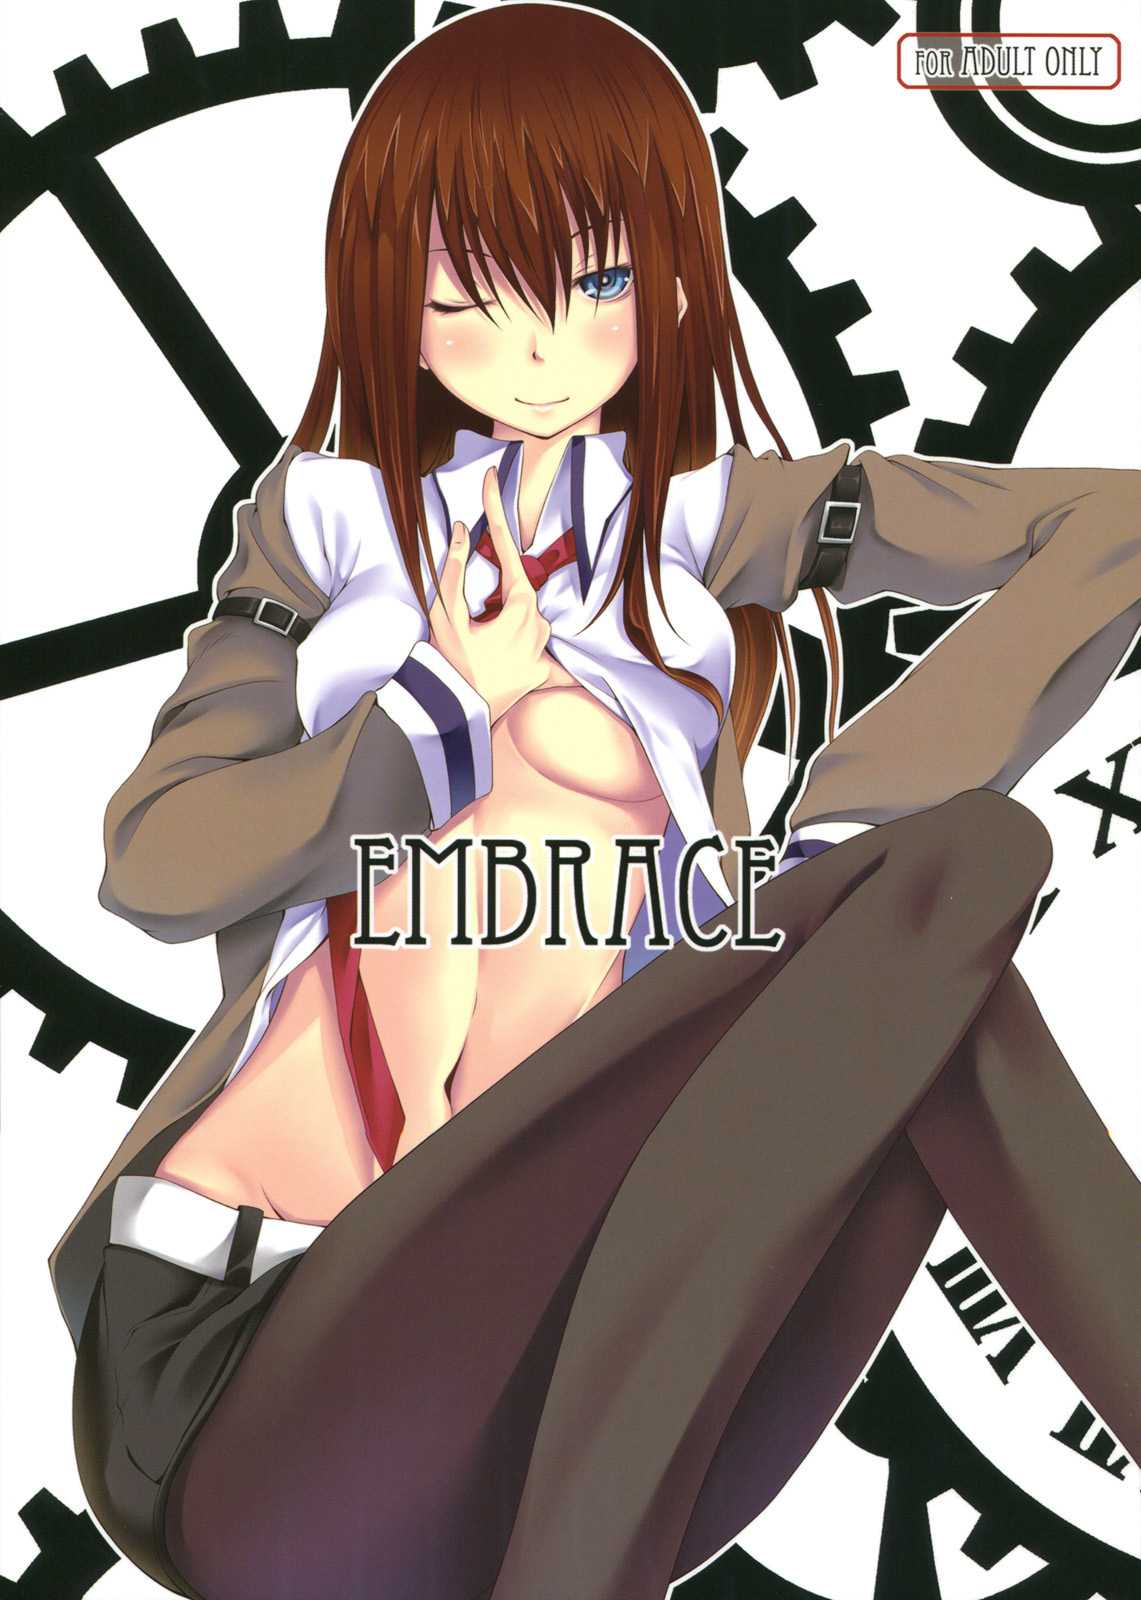 (C80) [Outrate] Embrace (Steins;Gate) [English] (C80) [アウトレート] Embrace (Steins;Gate) [英訳]